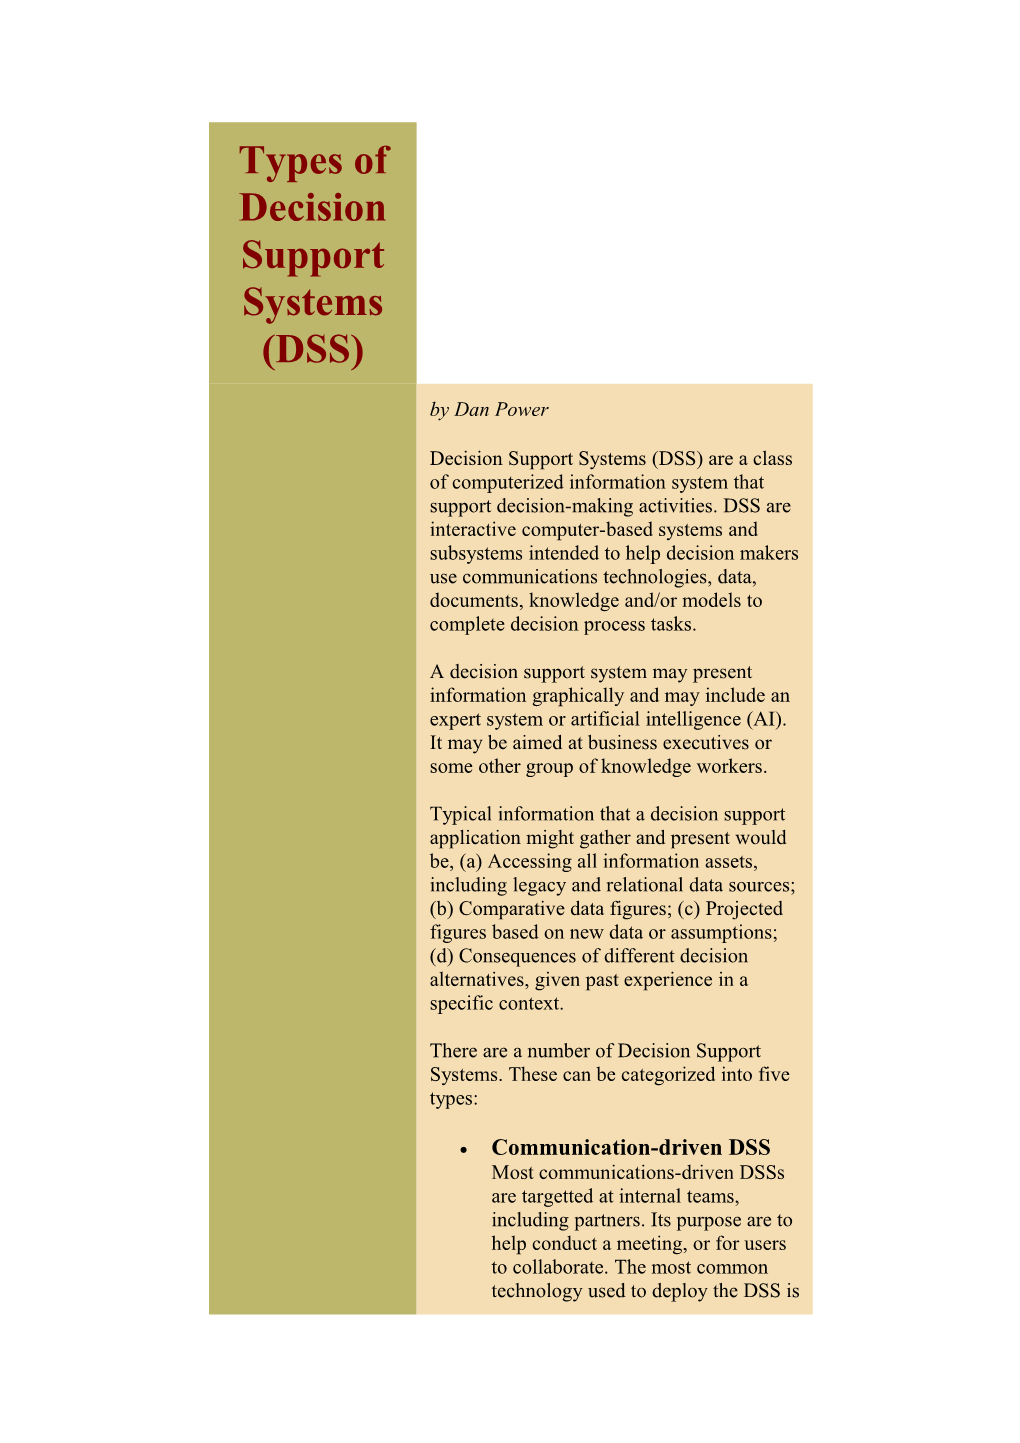 Types of Decision Support Systems (DSS)